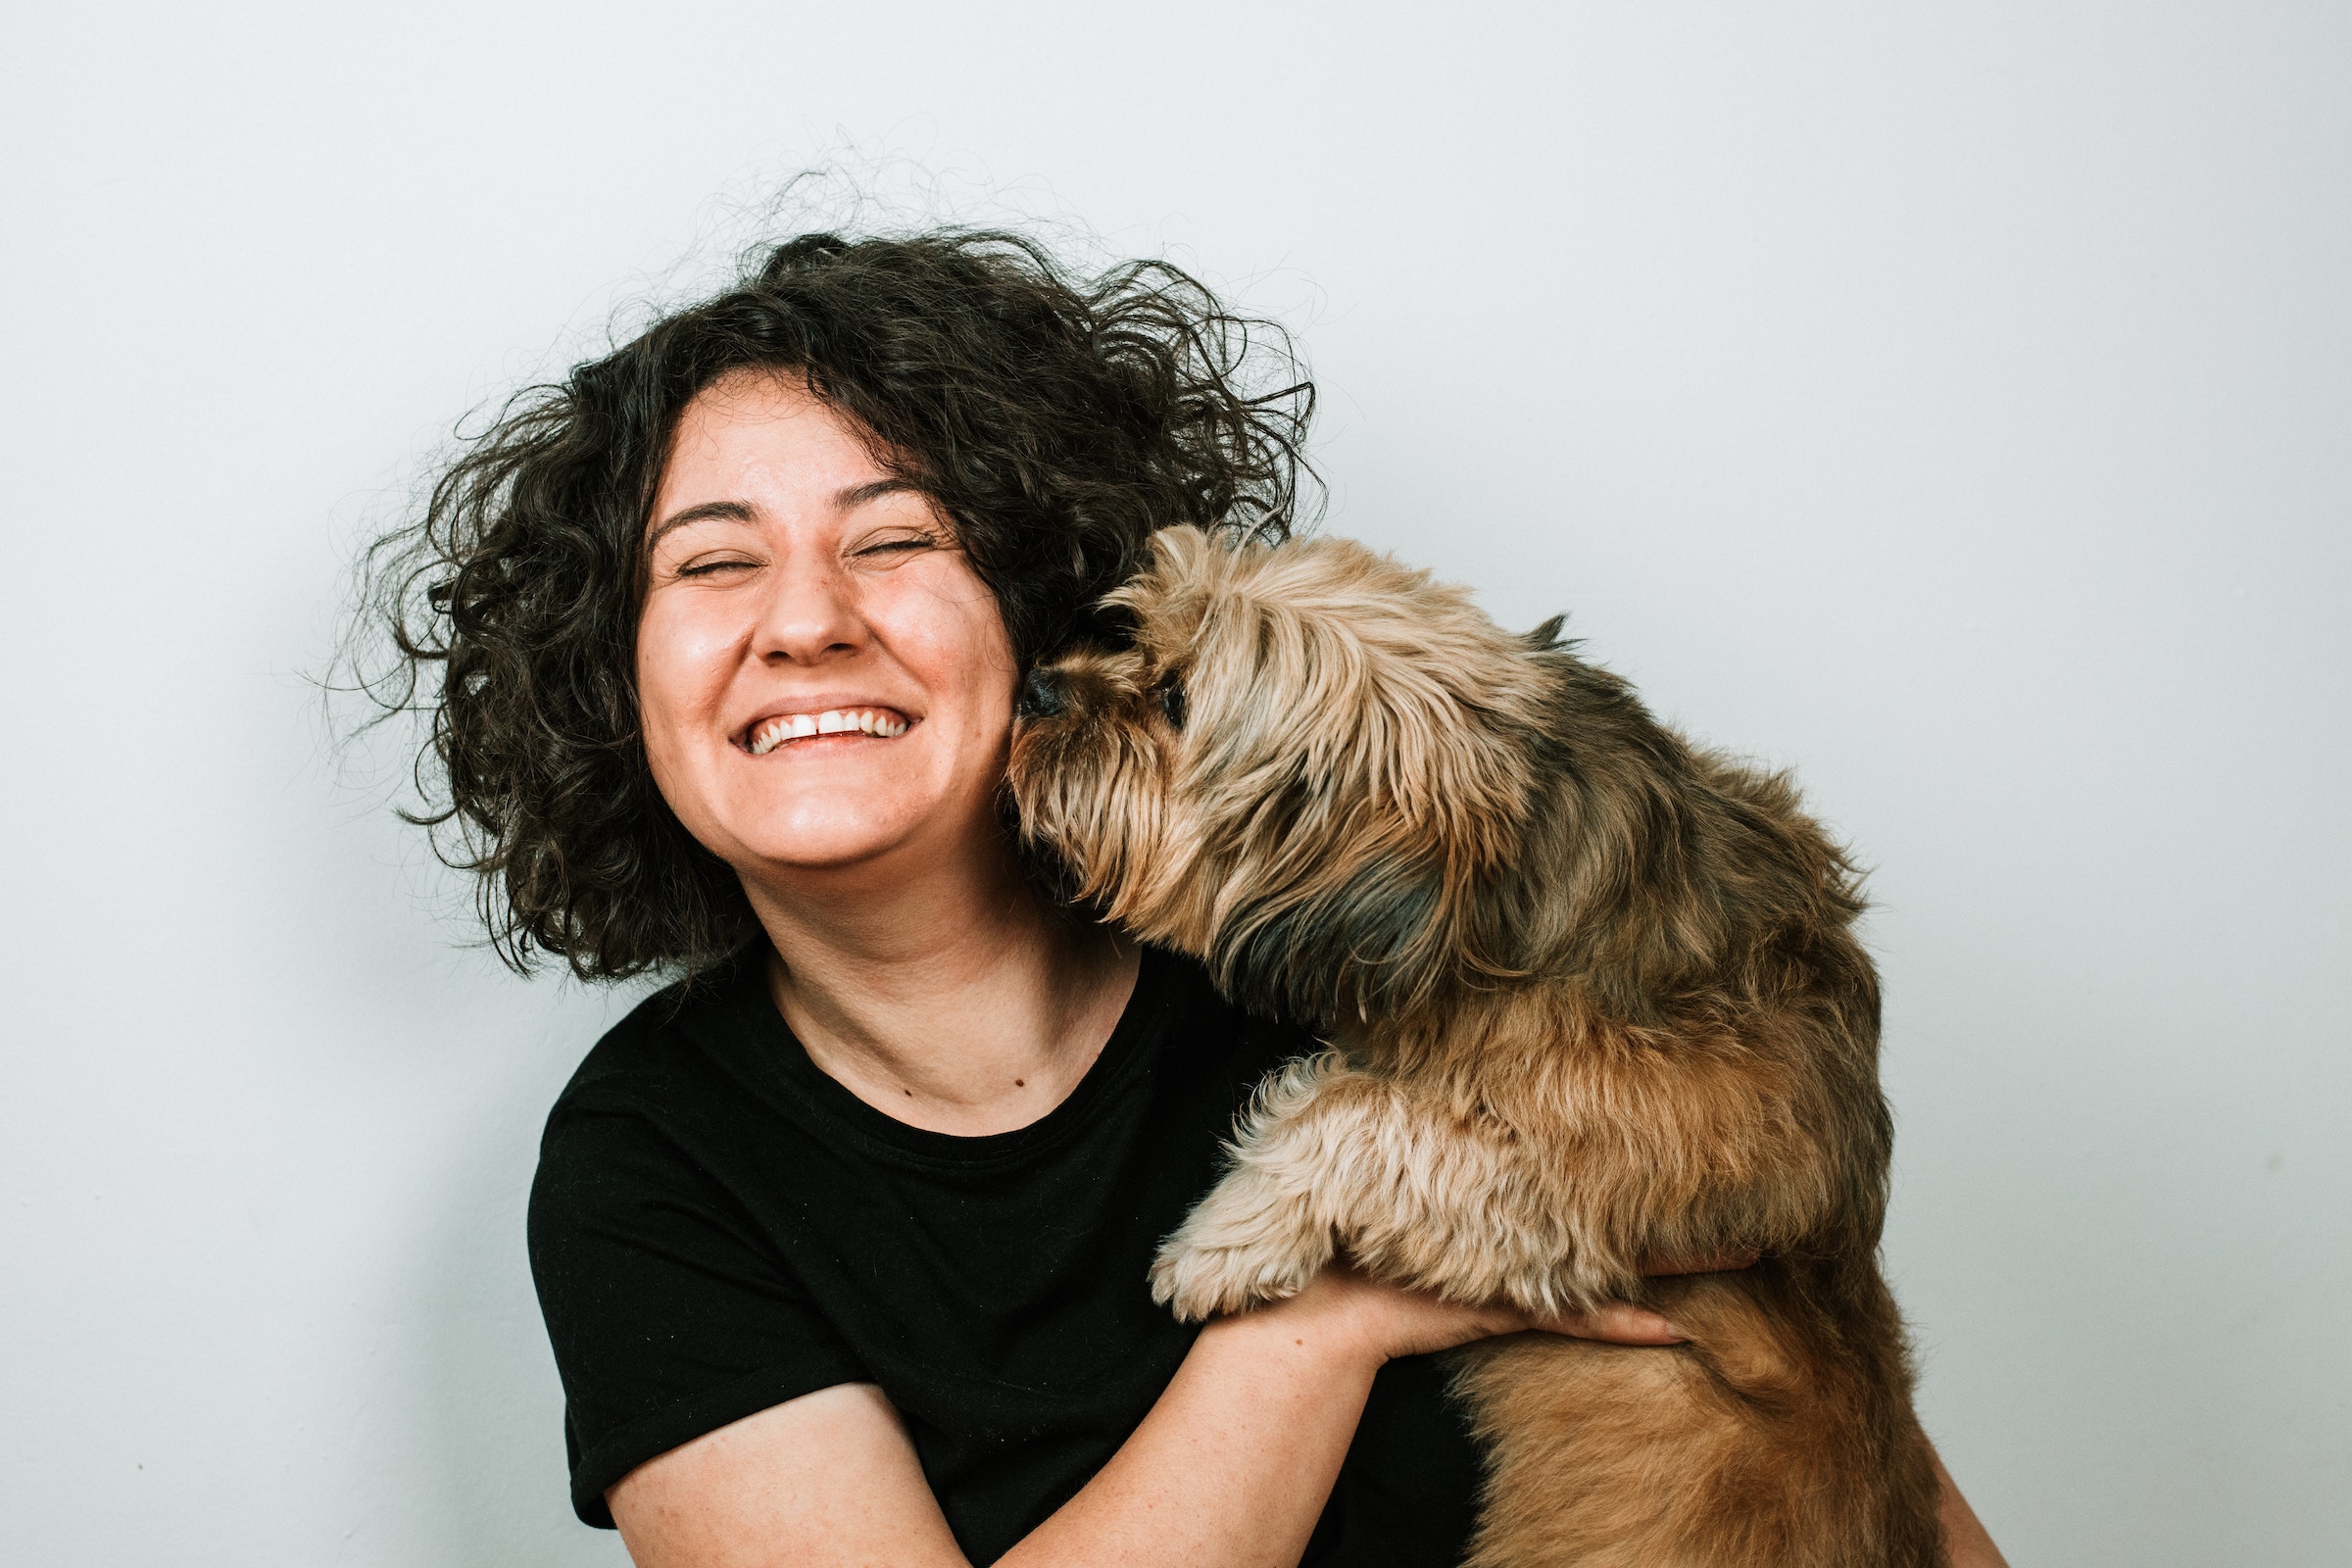 A woman hugs her small, brown dog and laughs as the dog sniffs her face